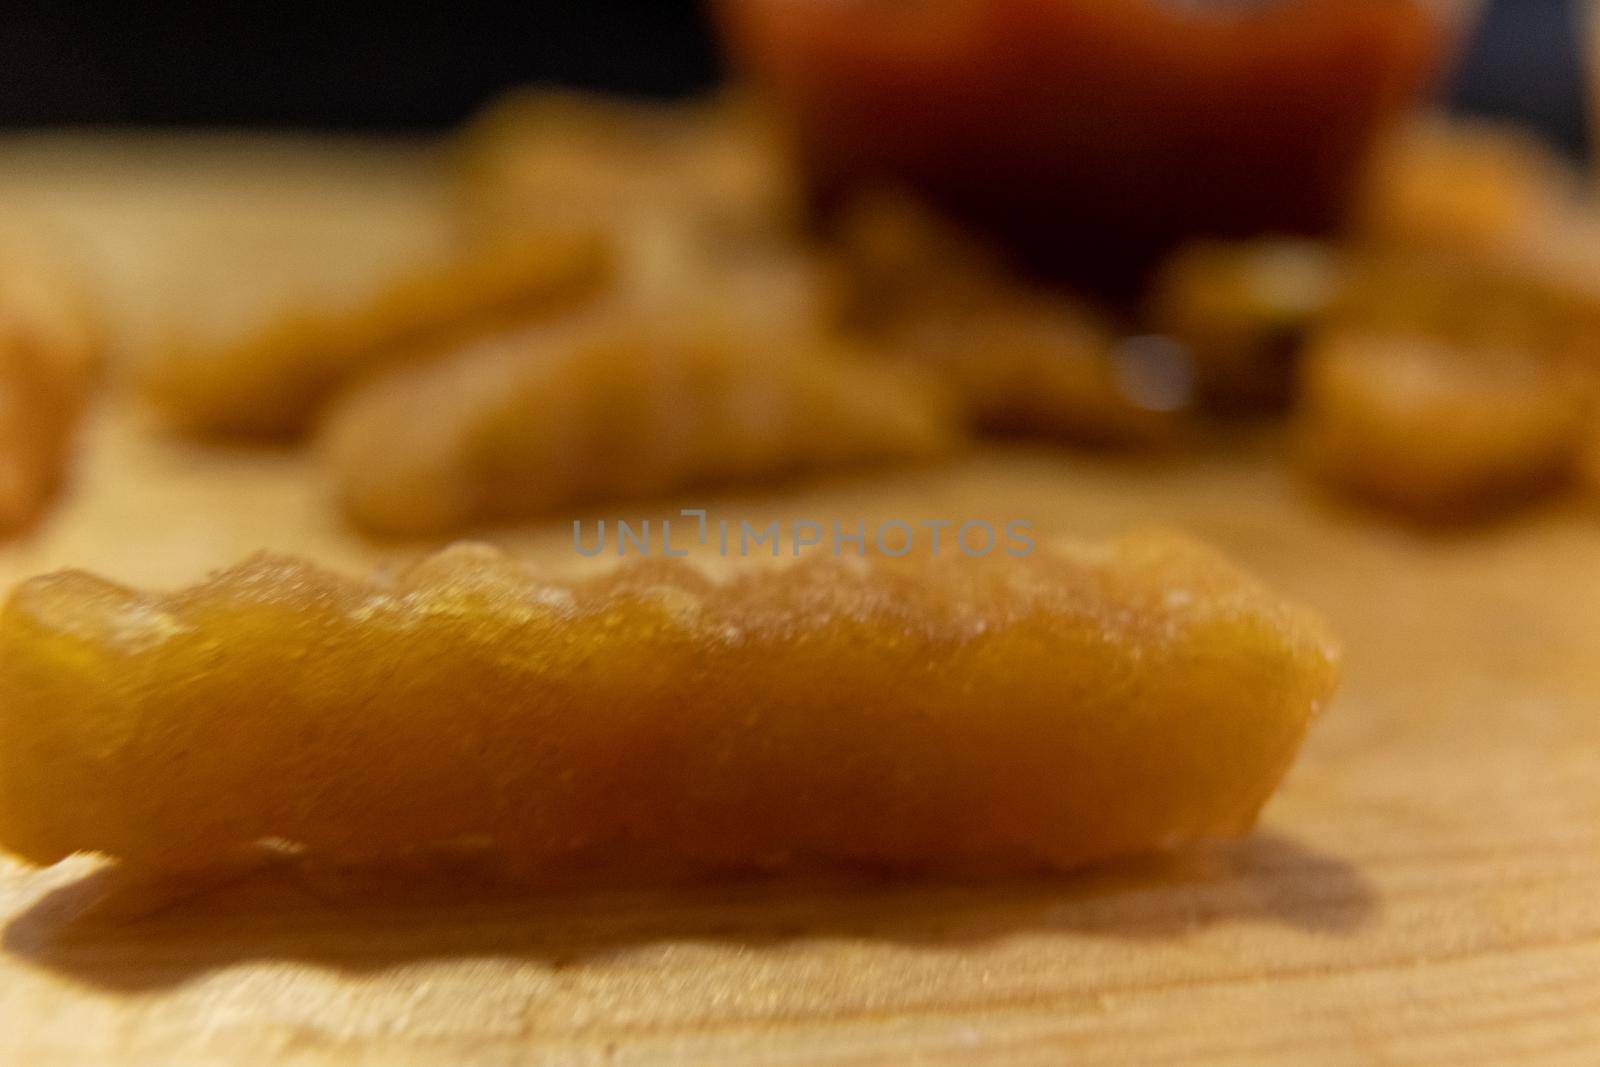 Extreme close-up of wavy French fry on wooden surface with blurry cup of ketchup as background. Tasty fried snacks and glass of red tomato dressing. Delicious fast food